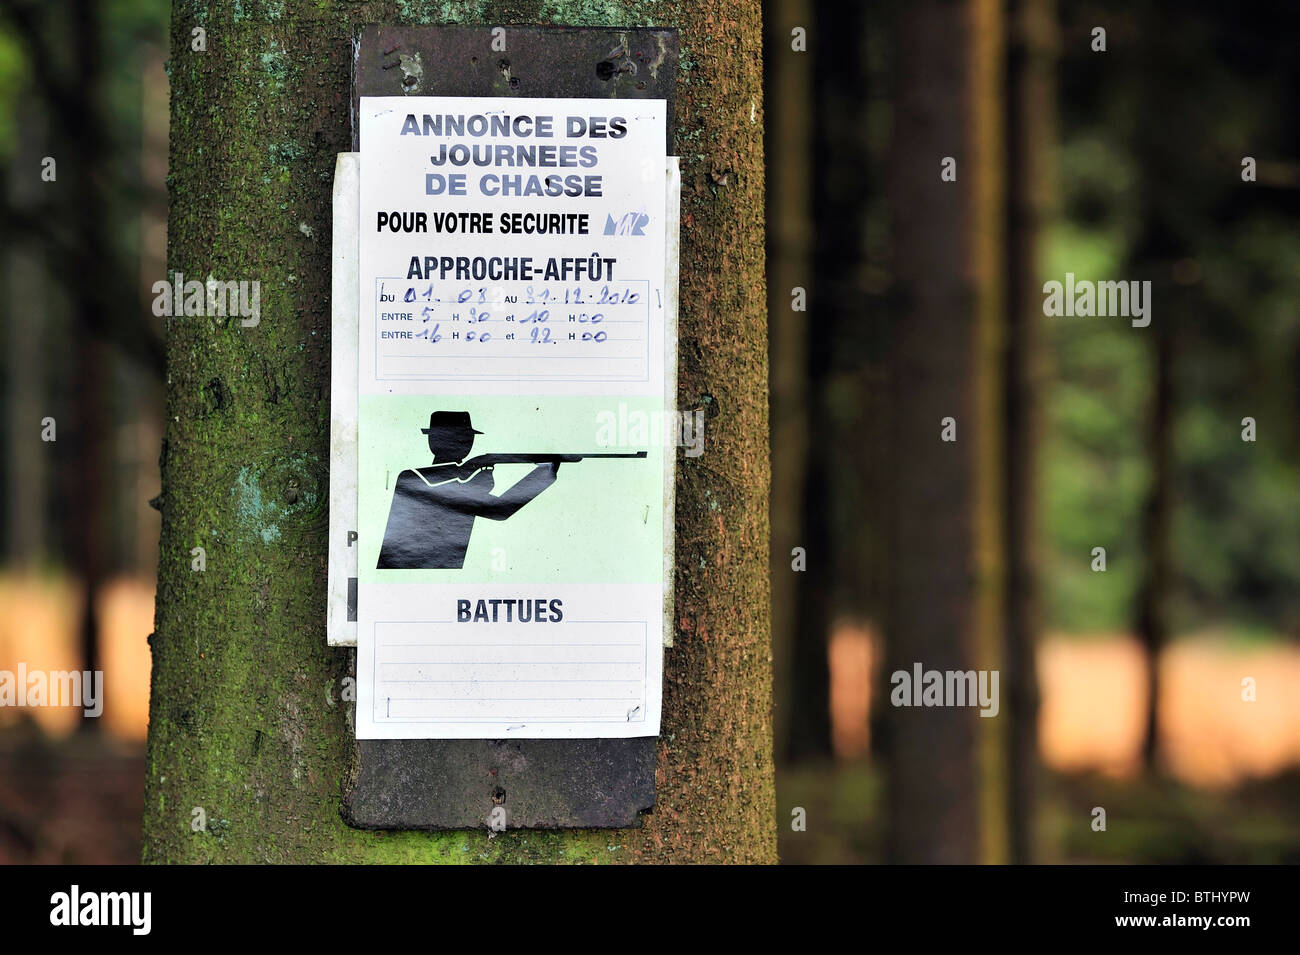 Announcement of hunting season in forest, Ardennes, Belgium Stock Photo